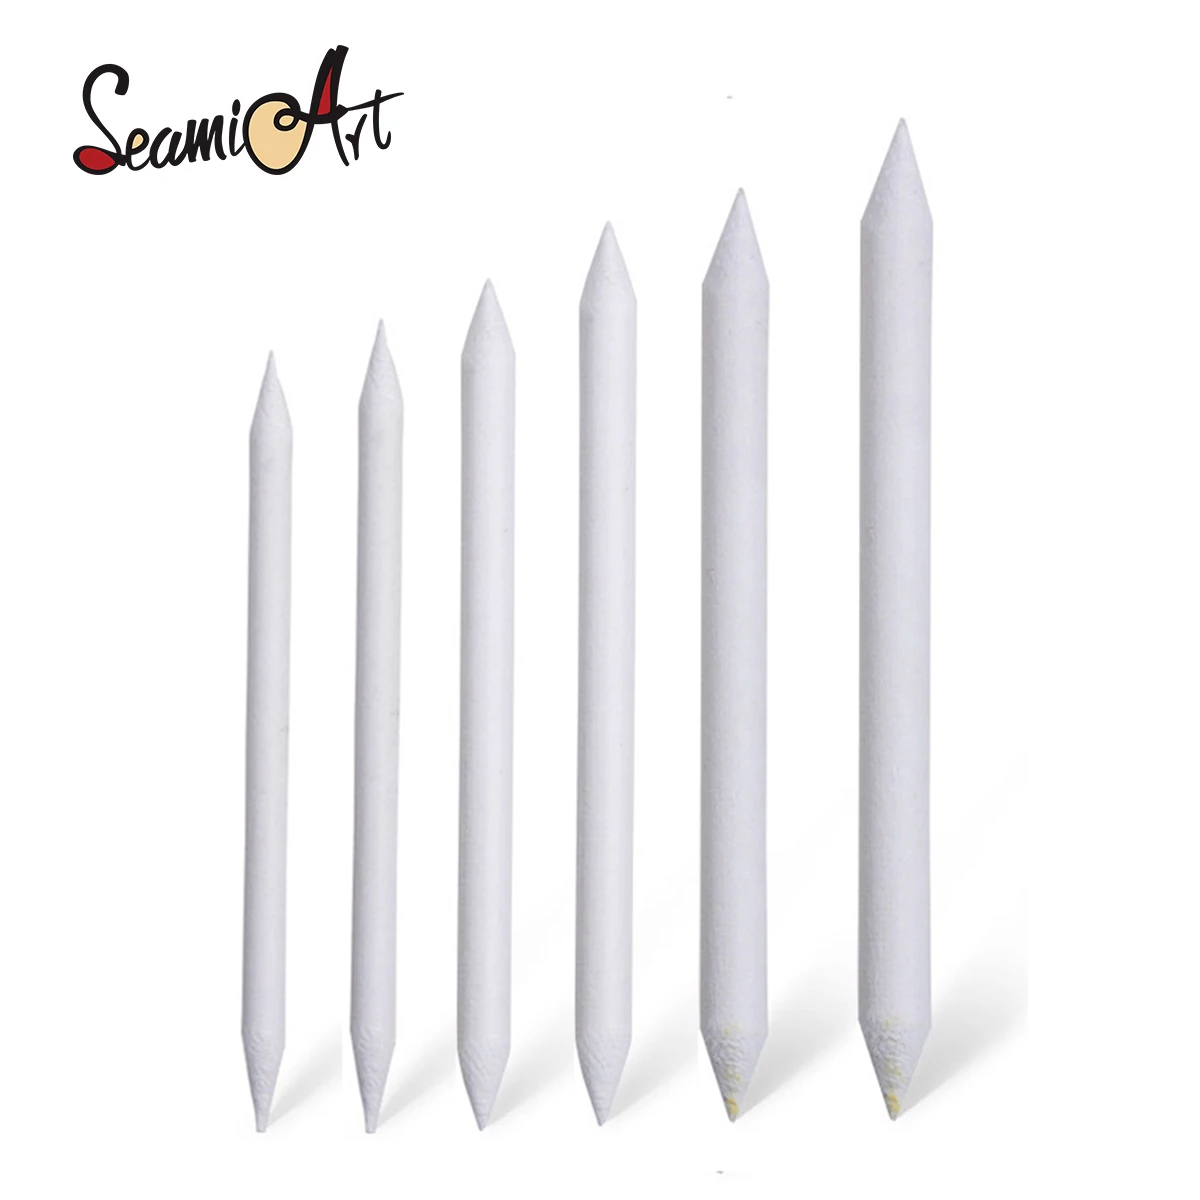 6pcs/set Blending Smudge Stump Stick Tortillon Sketch Art White Drawing Charcoal Sketcking Tool Rice Paper Pen Supplies silicone painting mat pigment palette non stick craft mat for painting ink blending watercoloring stamping crafting tool